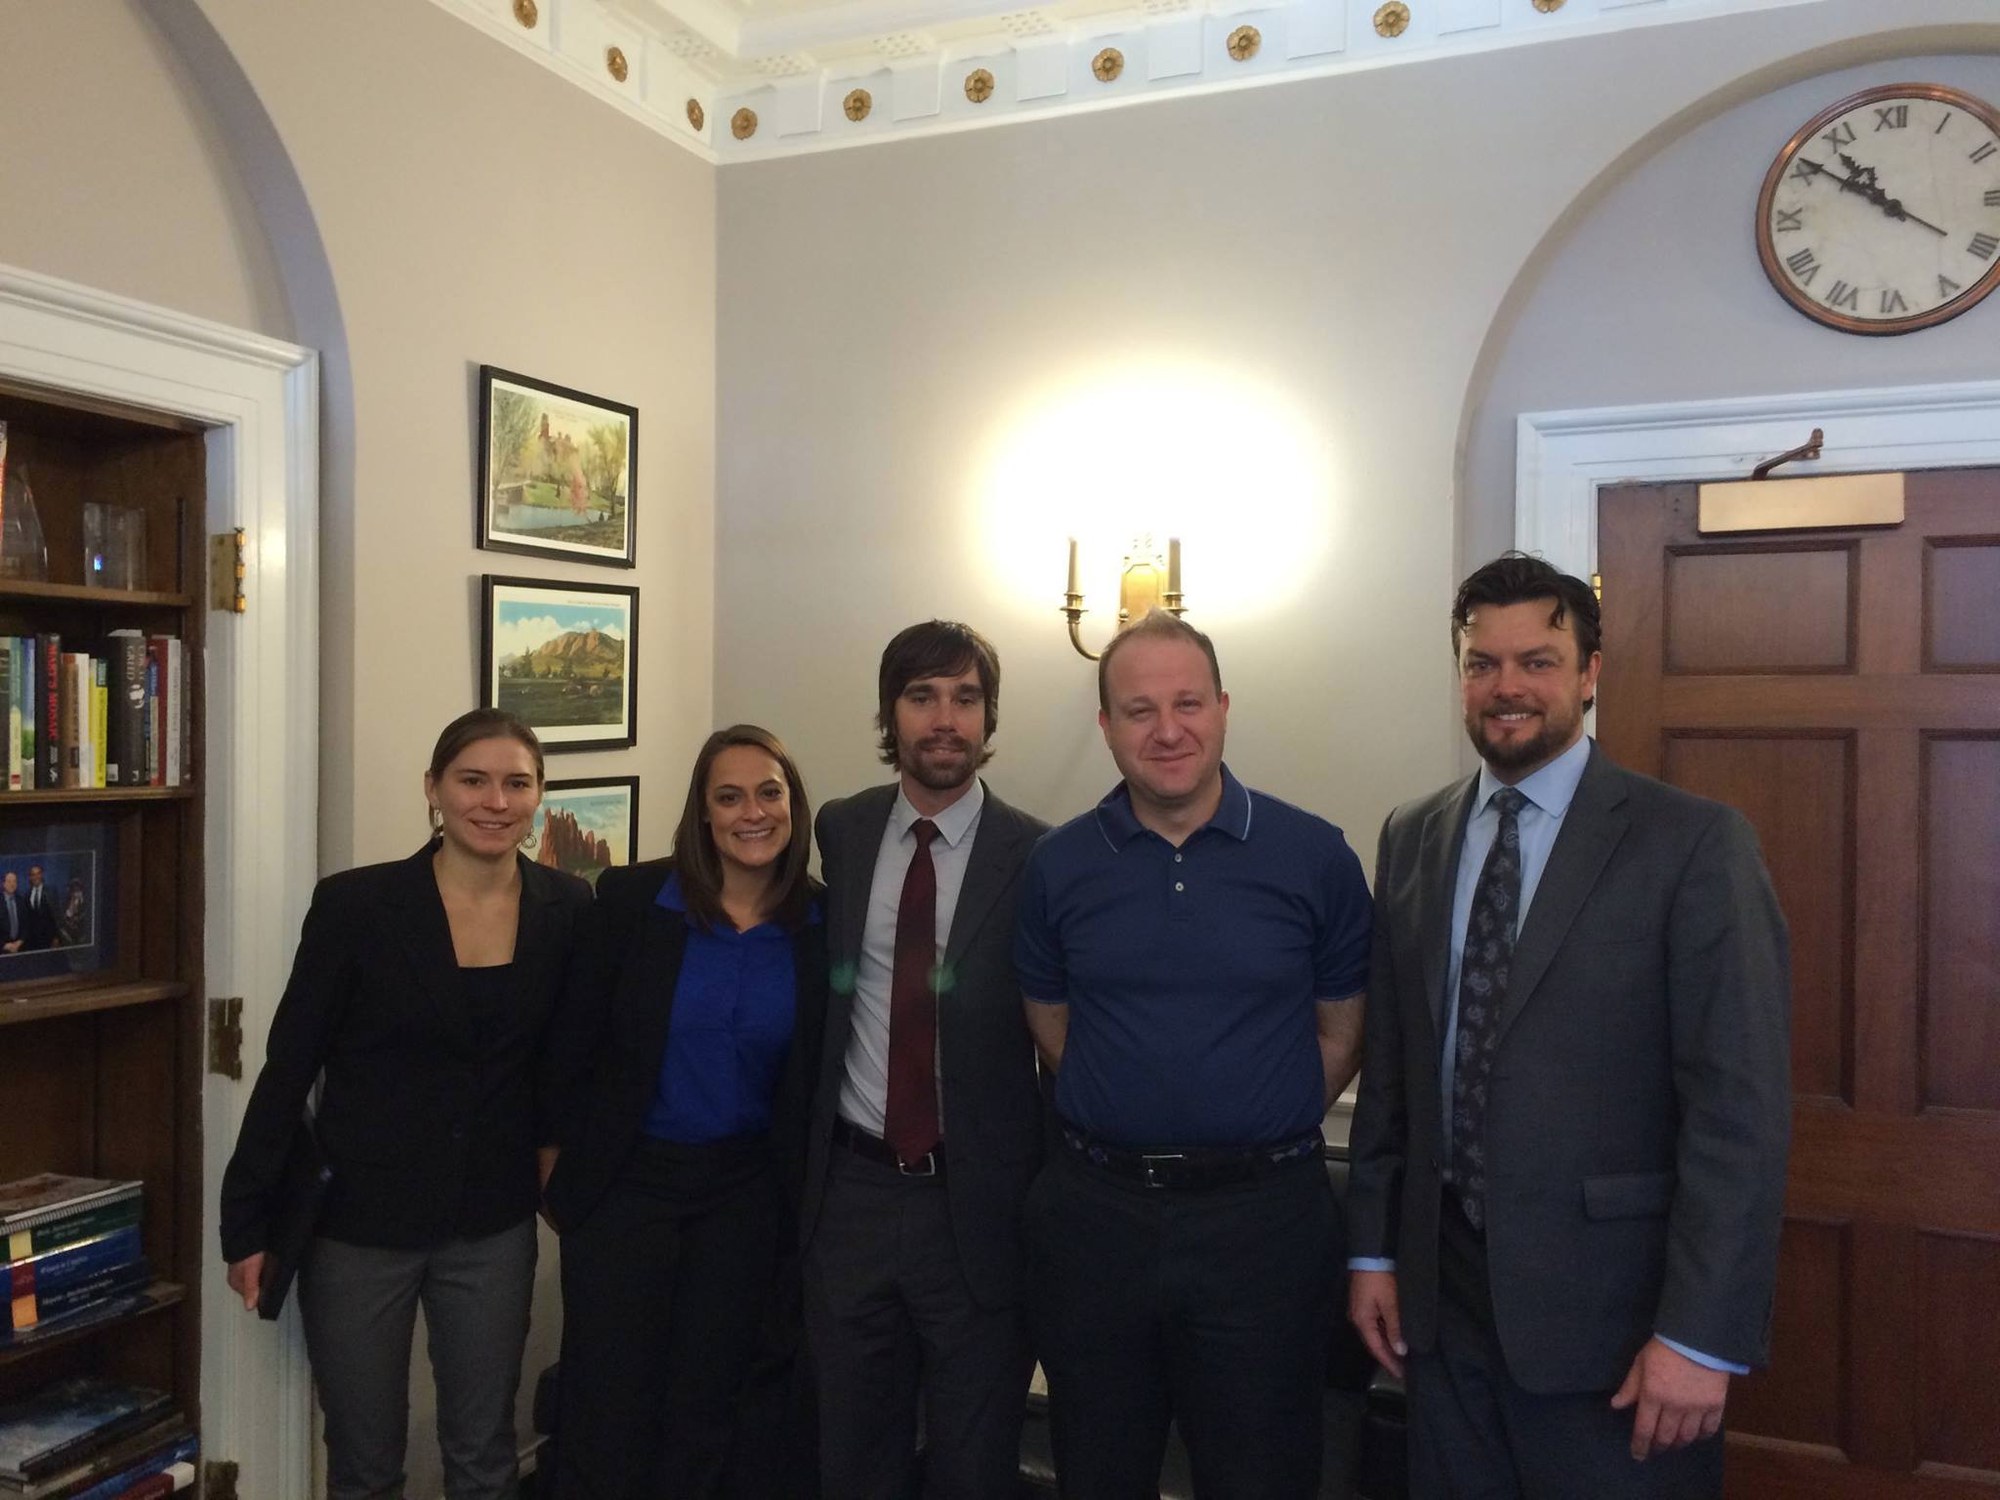 From left to right: Julie Mach (CMC), Aimee Ross (International Mountain Biking Association), Jason Bertolacci (International Mountain Biking Association), Jared Polis (US Representative), and Nathan Fey (American Whitewater).